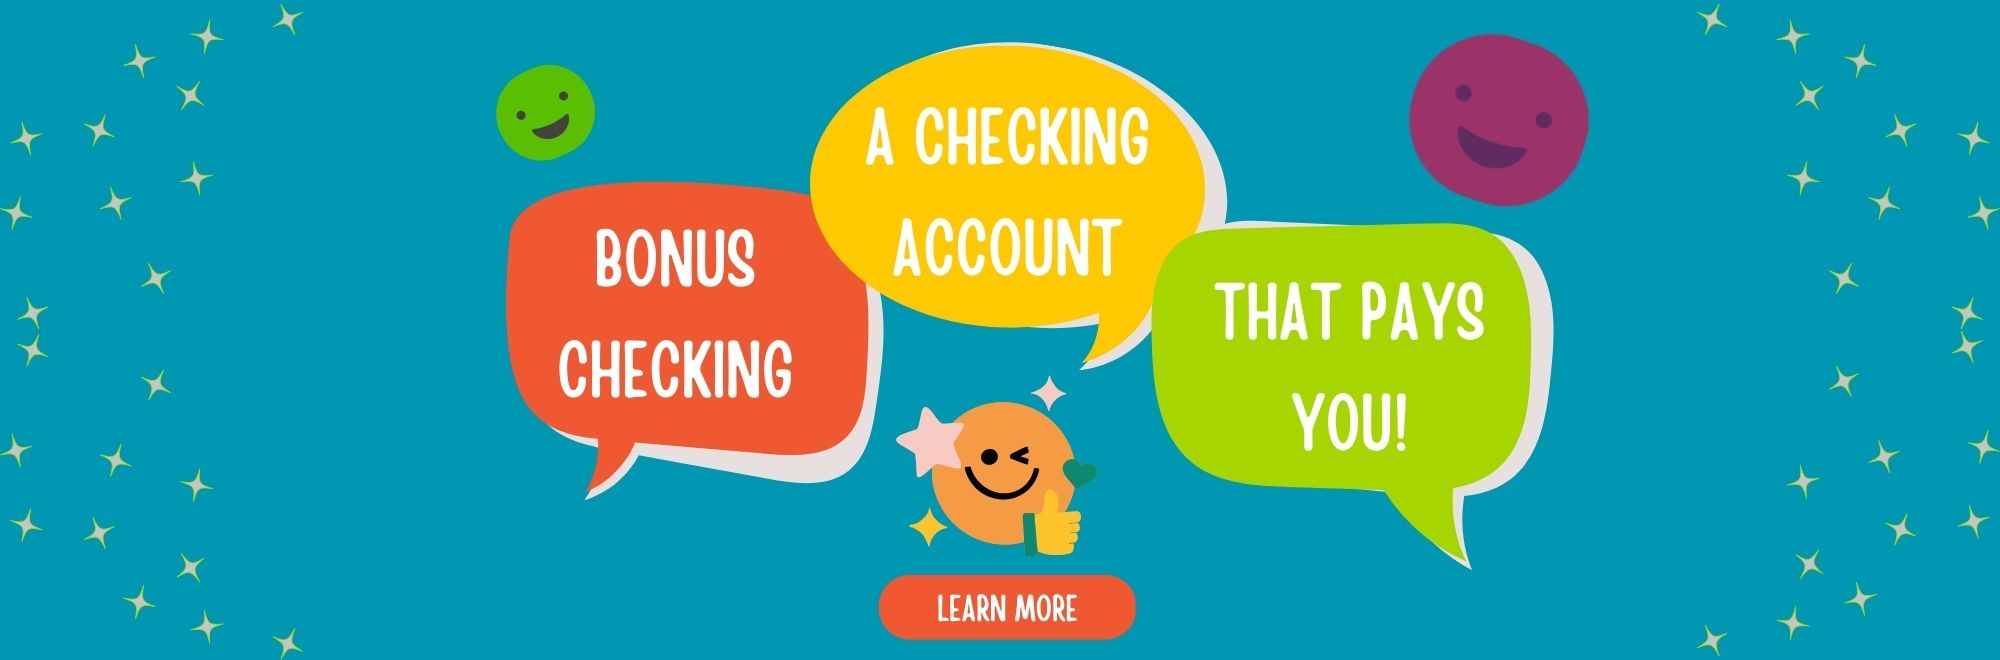 Learn more about Bonus Checking. A checking account that pays you.